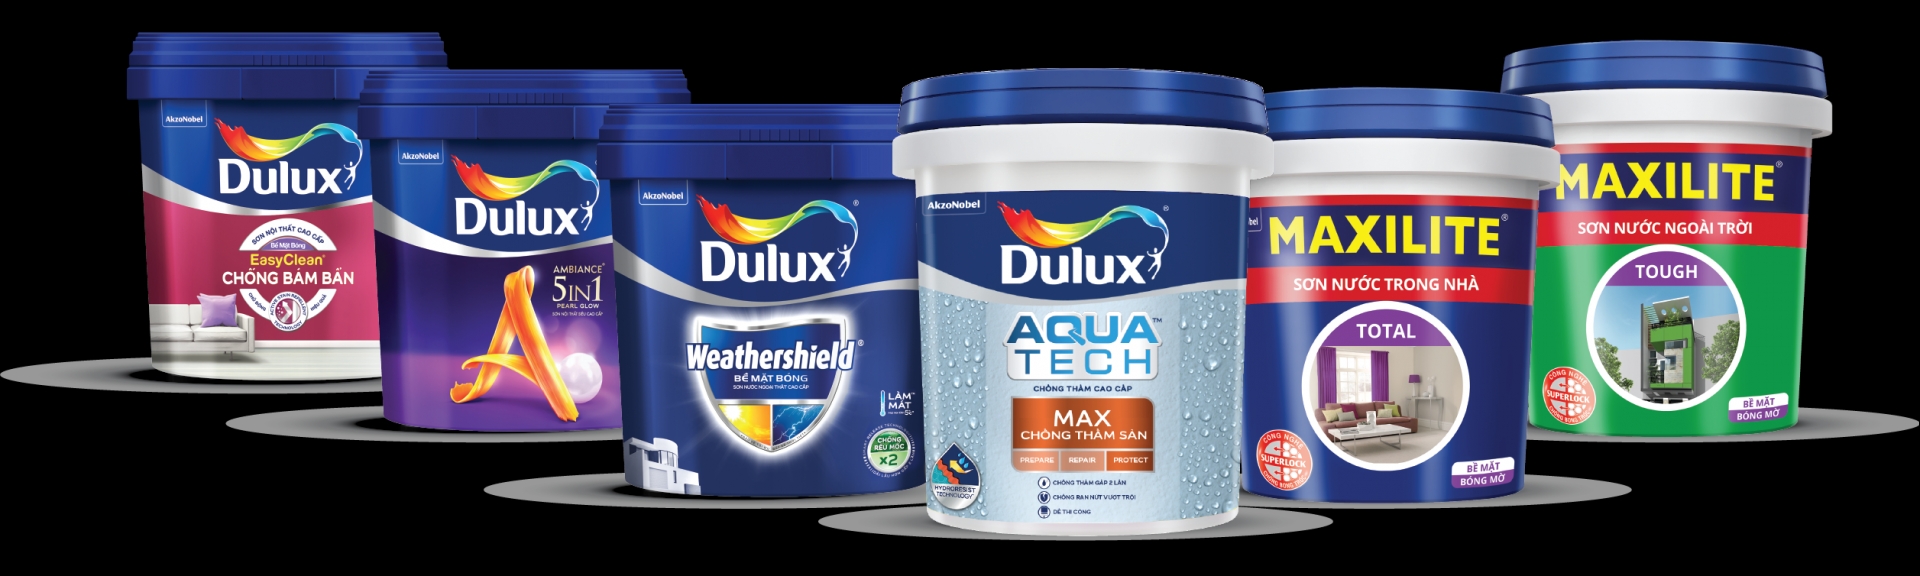 Maxilite and Dulux to launch new products to optimise customer experience